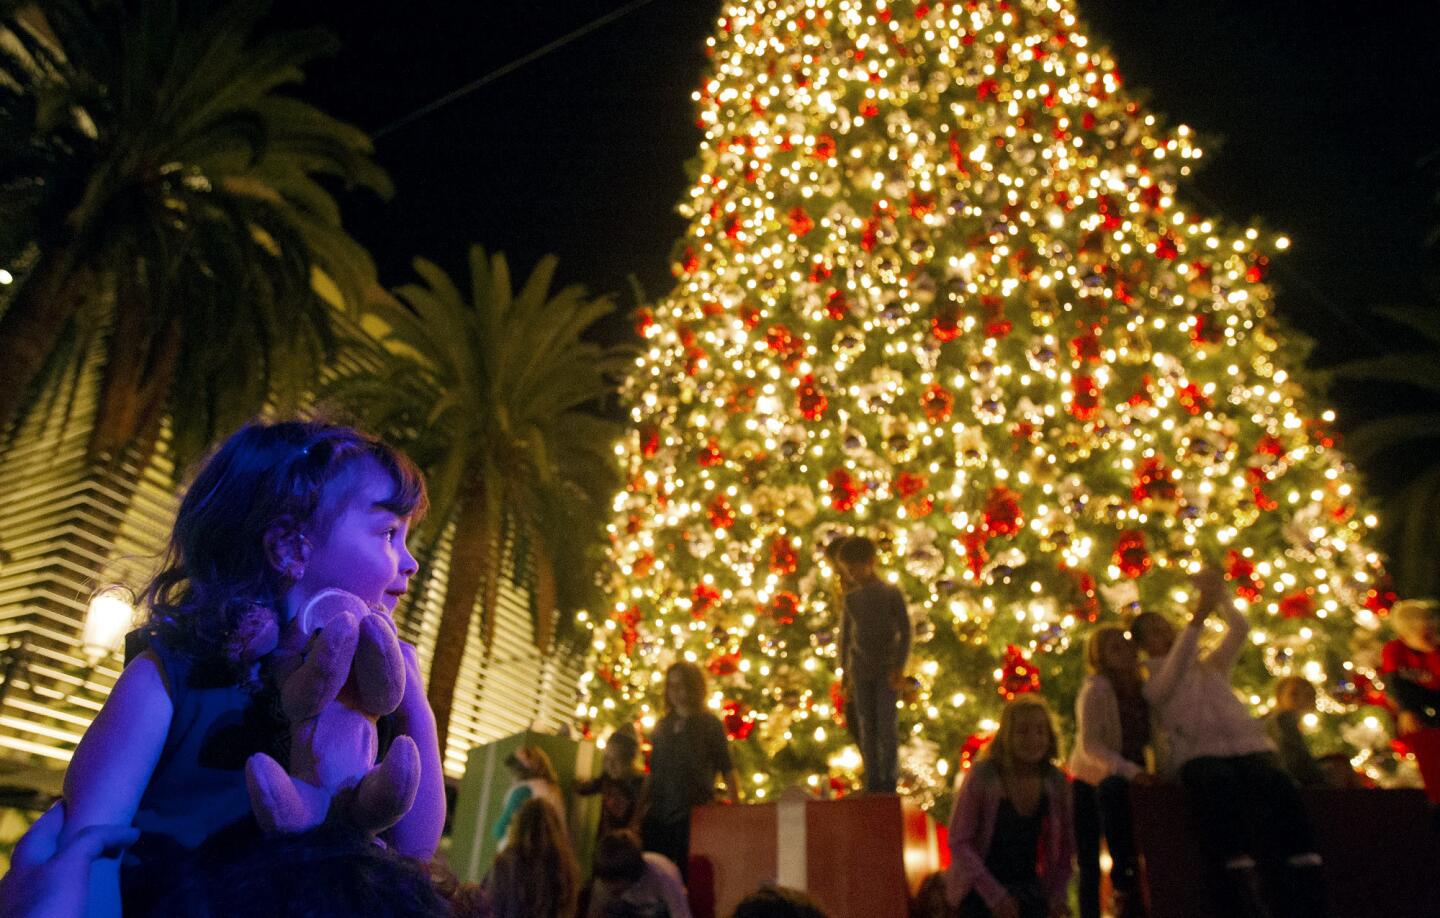 Adrina Robinson, 2, admires the the lights atop her uncle, David Cuccia's shoulders during the Christmas tree lighting at Fashion Island on Friday, November 14.